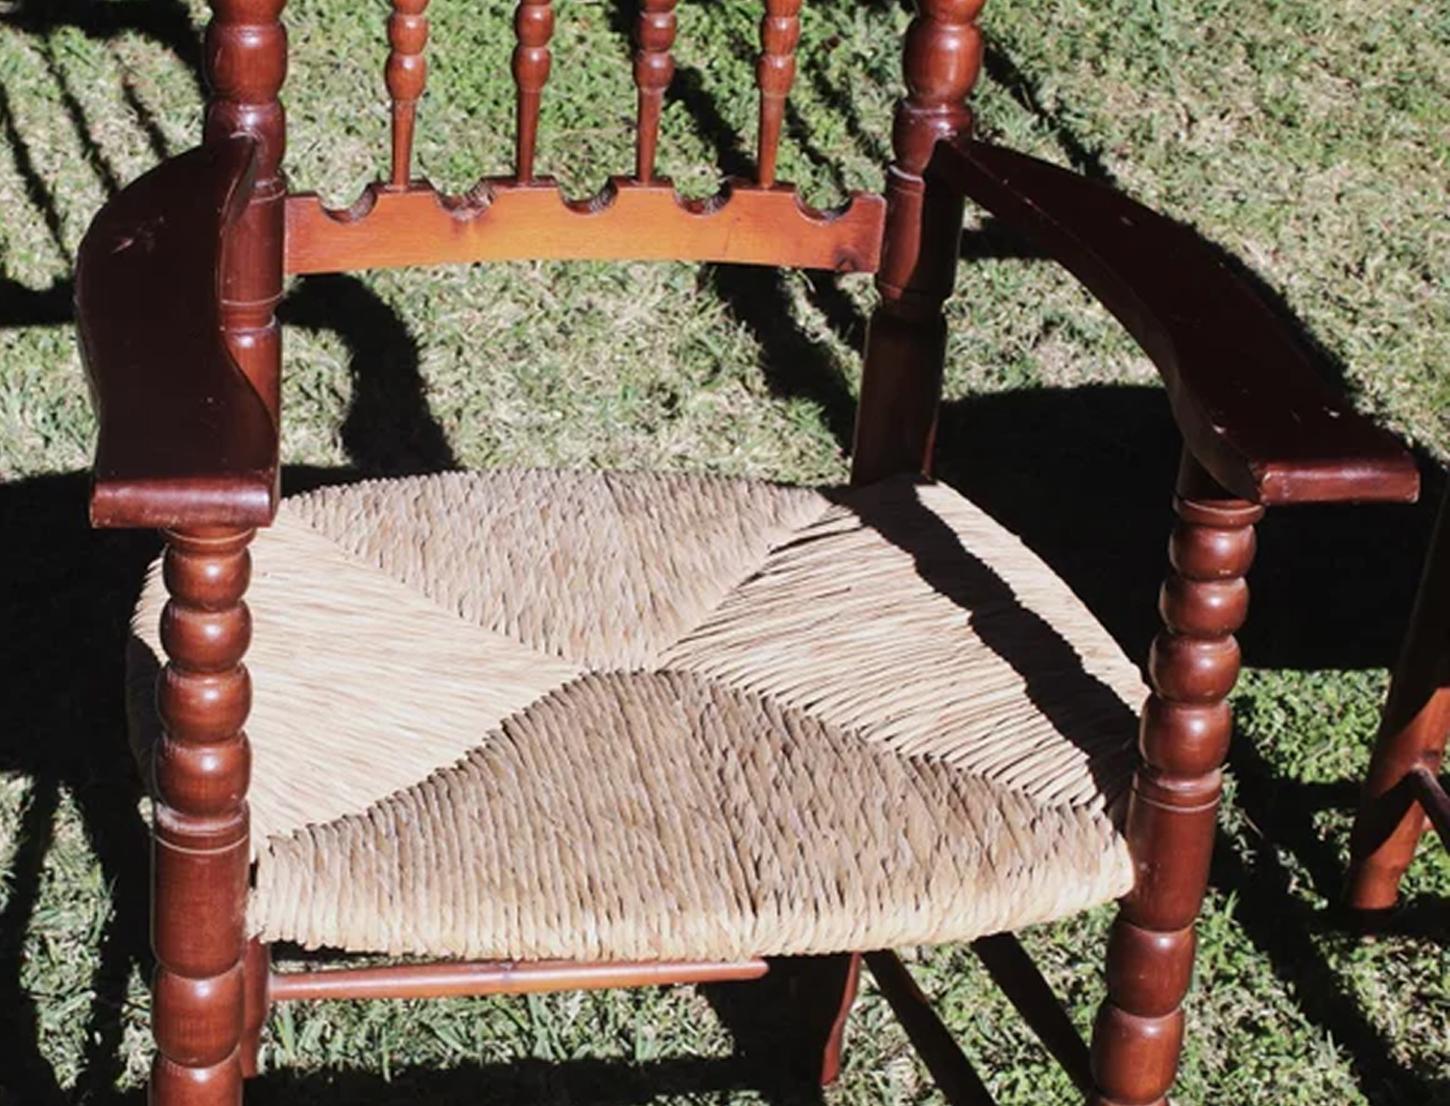 pair of antique armchairs turned legs and enea seat
 Europe.
rustic style
throne
natural wood
renaissance revival
french provincial, provence, French riviera
friar armchair.
European Renaissance, this type of turning was used not only in Spain, but